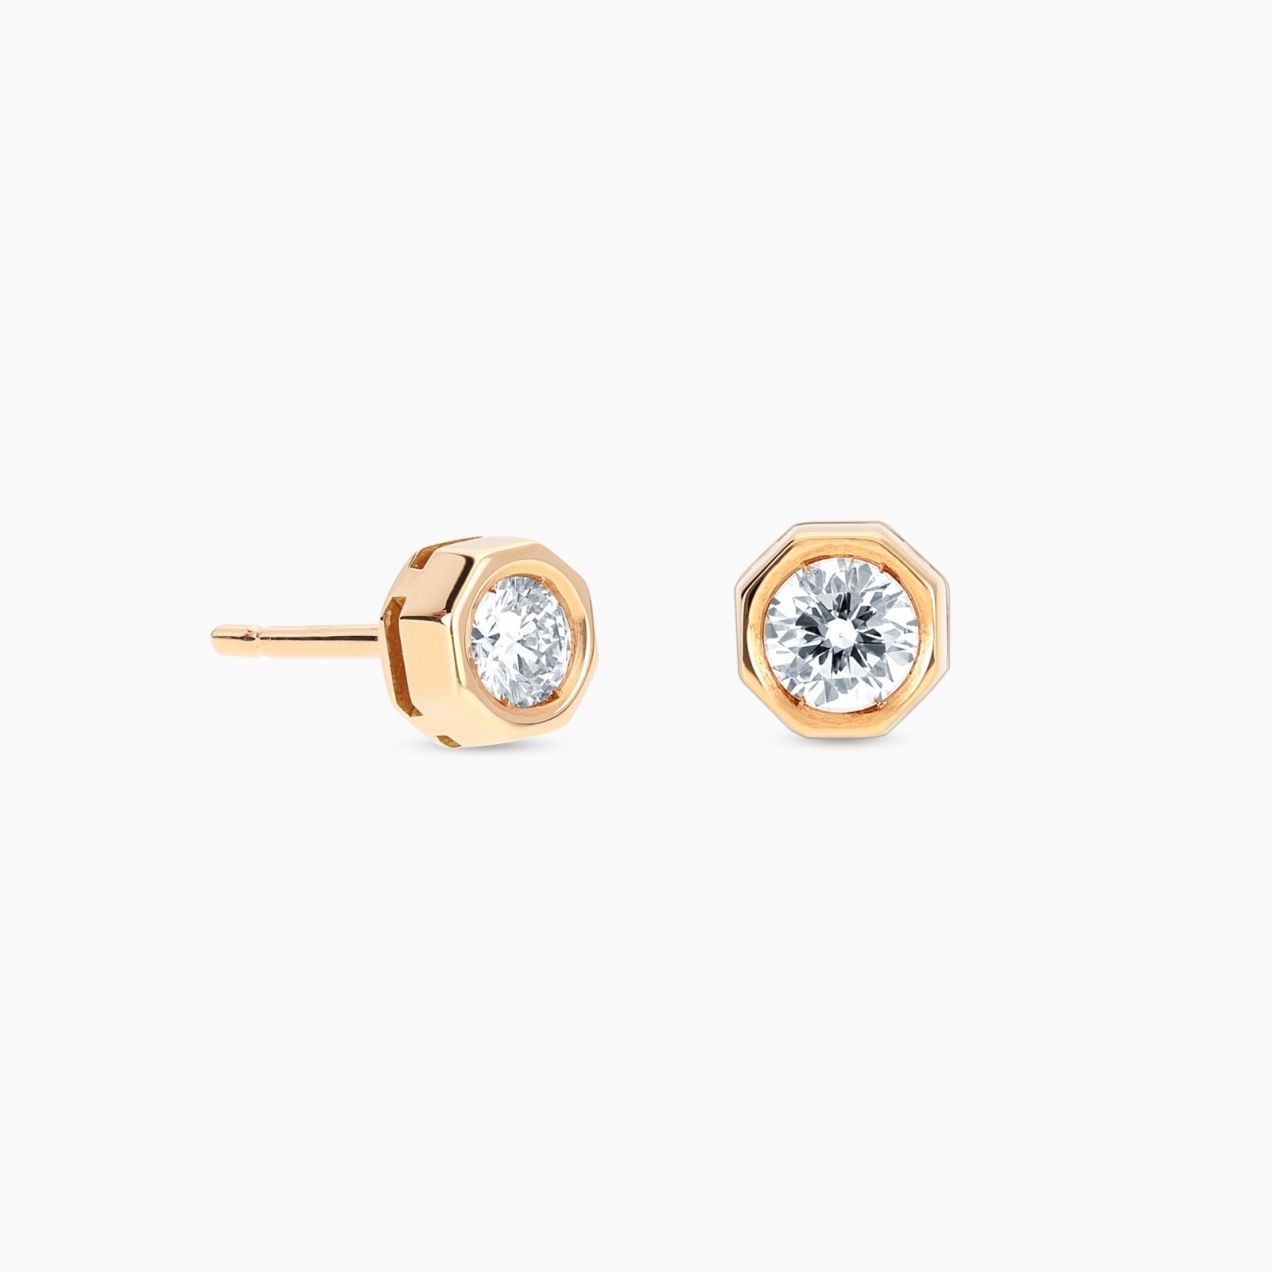 Rose gold earrings with diamond